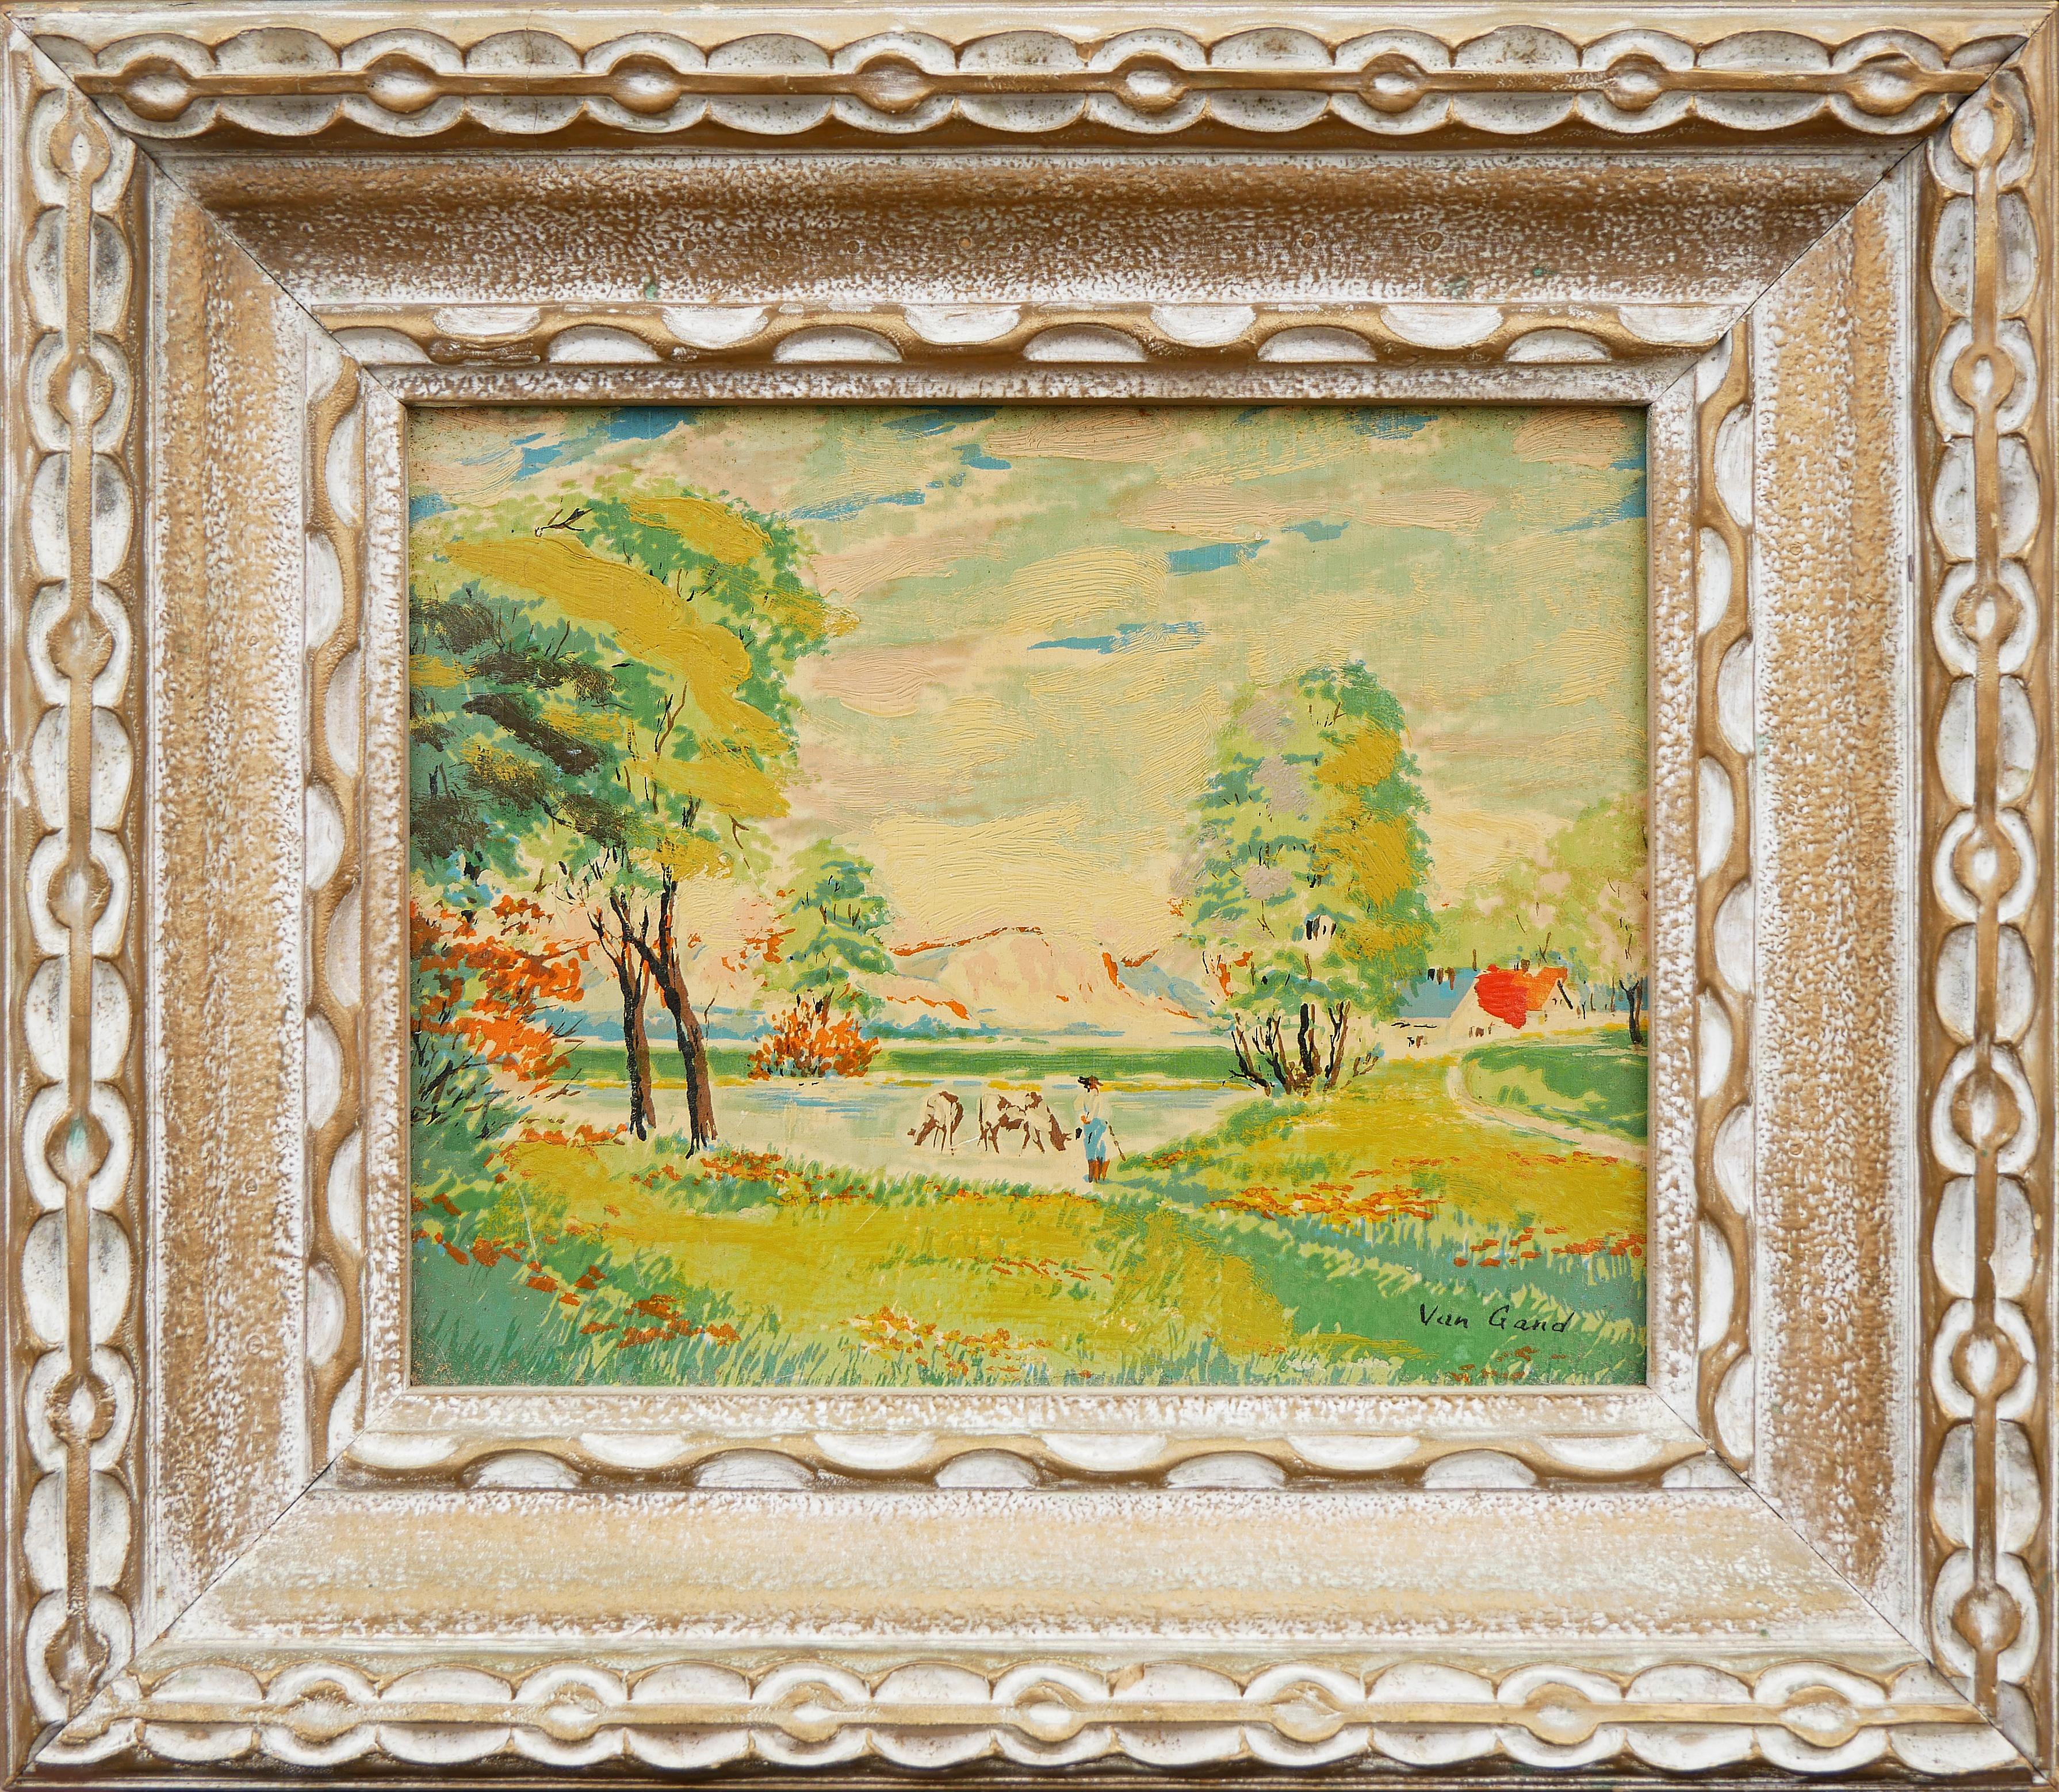 Green and yellow-toned post-impressionist landscape by Van Gand. The painting depicts a countryside landscape in Belgium. Signed by the artist at the bottom. Framed in an arts and crafts style frame. 

Dimensions Without Frame: H 7.5 in. x W 9.5 in.